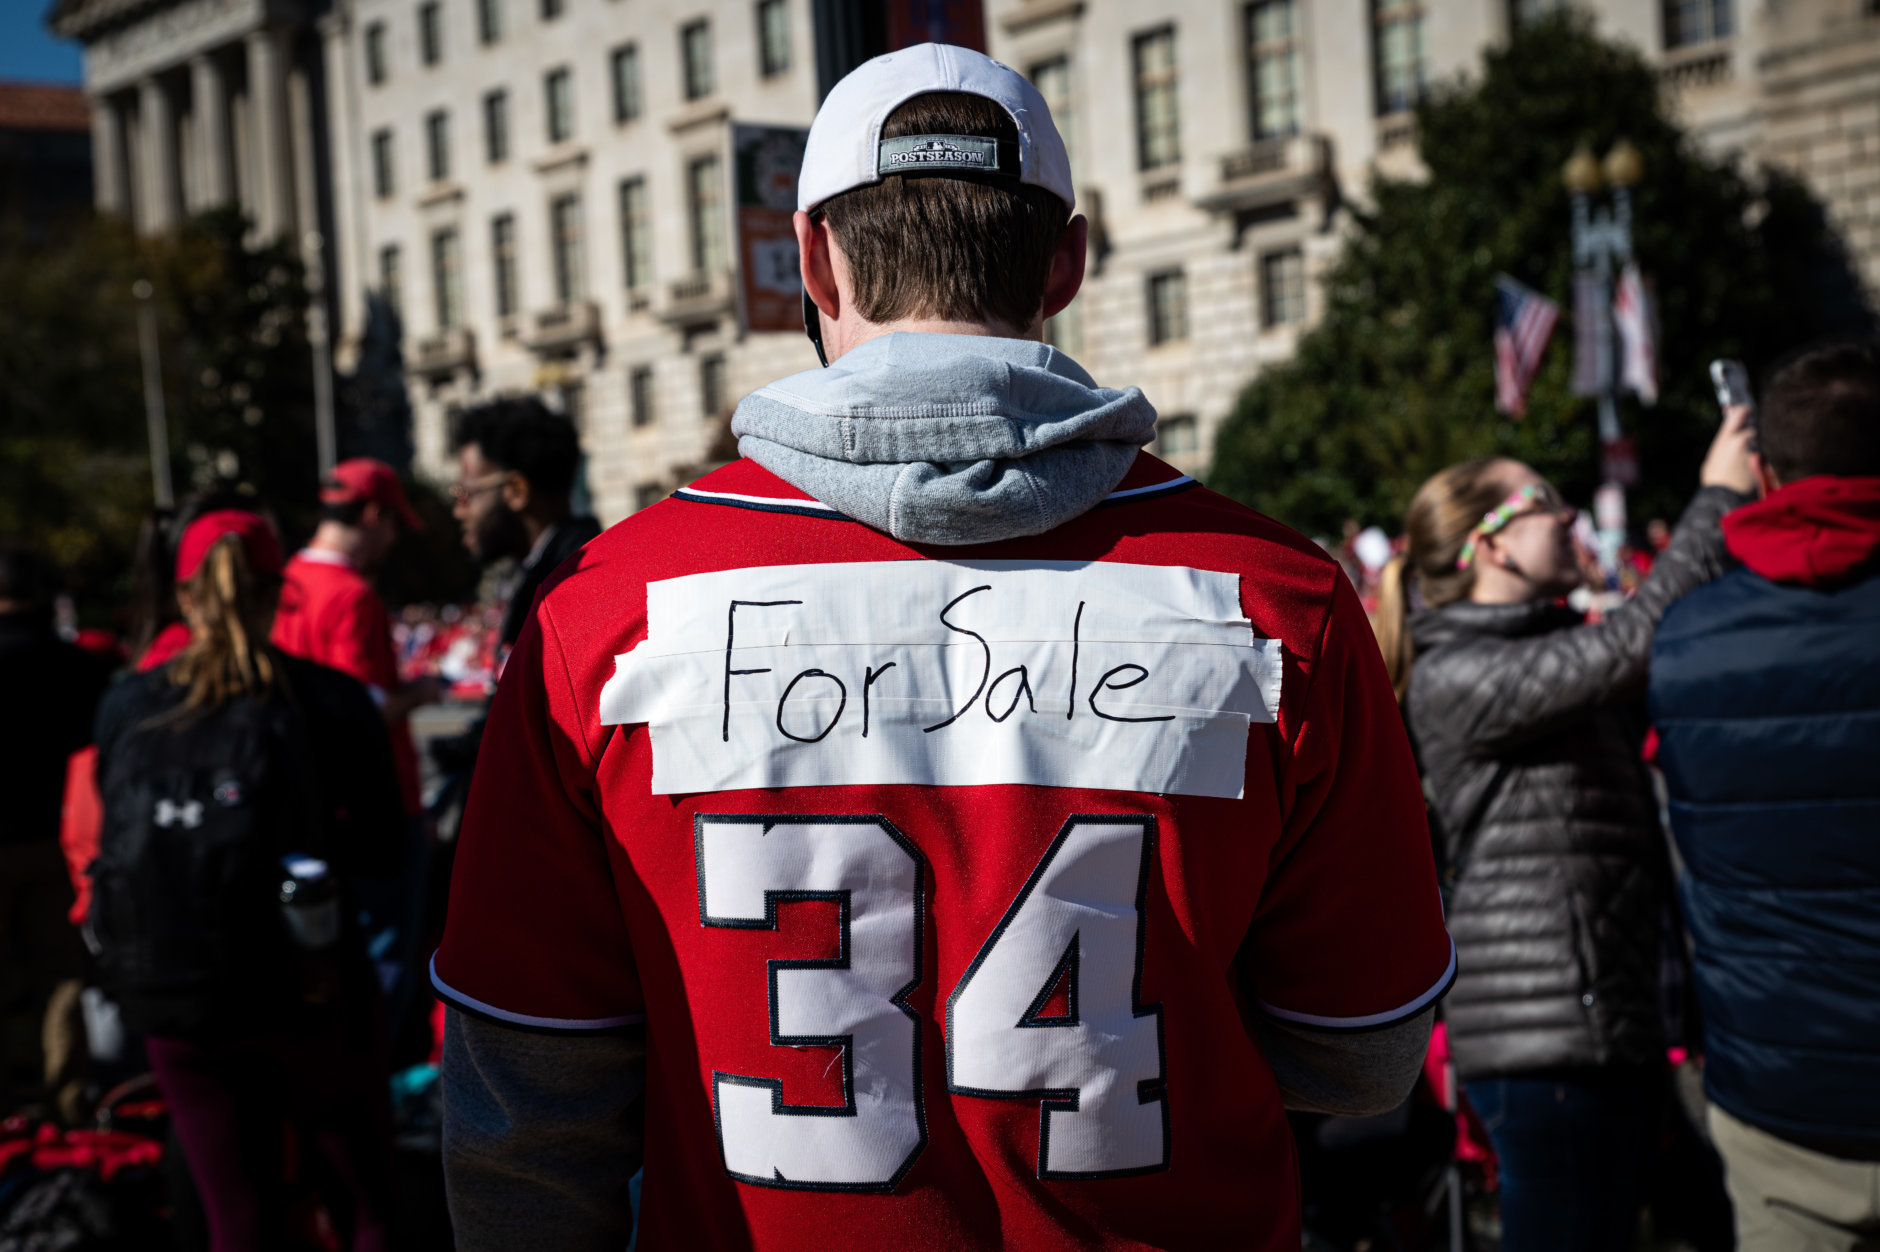 Thousands Converge on D.C. for Nats' Title Parade - The Washington